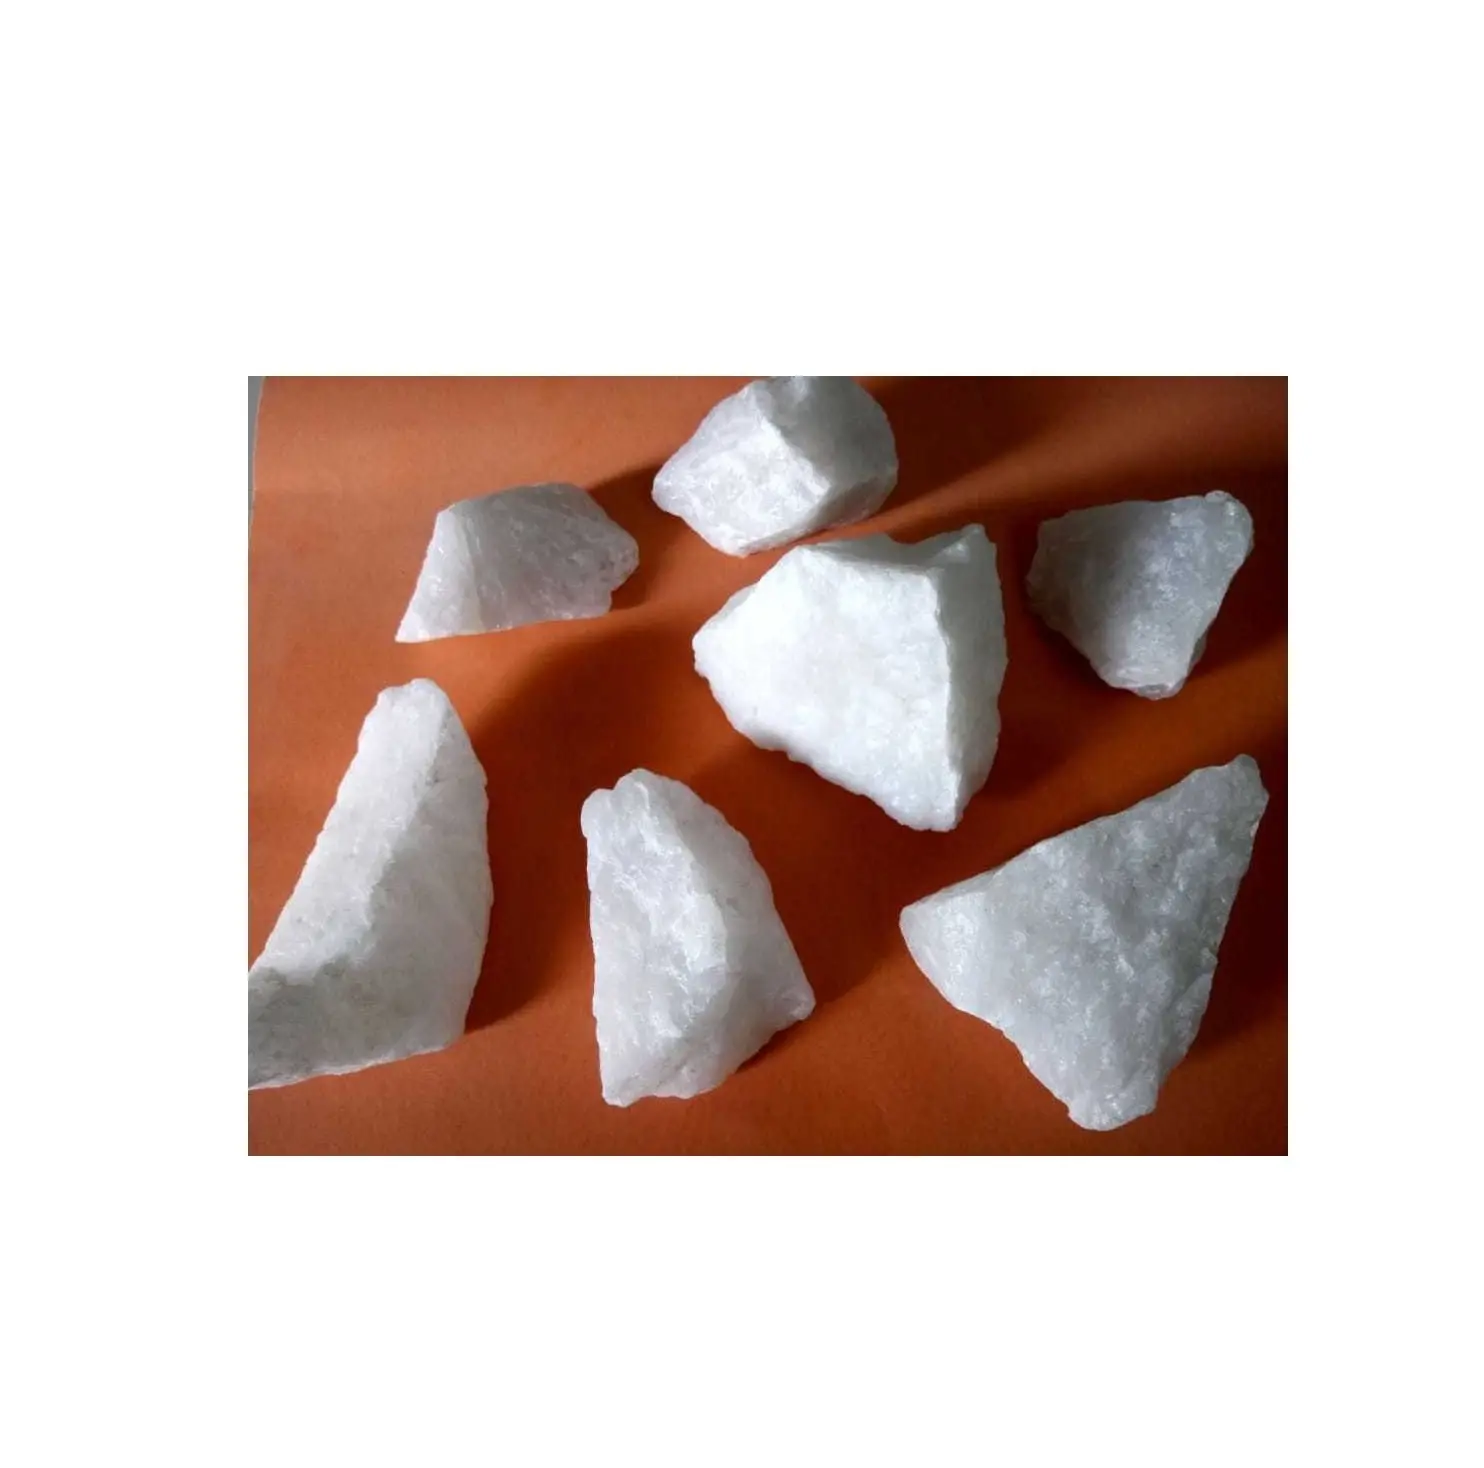 Good Quality Quartz Lumps M Grade Sio2-99.4% Use in Manufacturing of Ferro Silicon from Indian Supplier